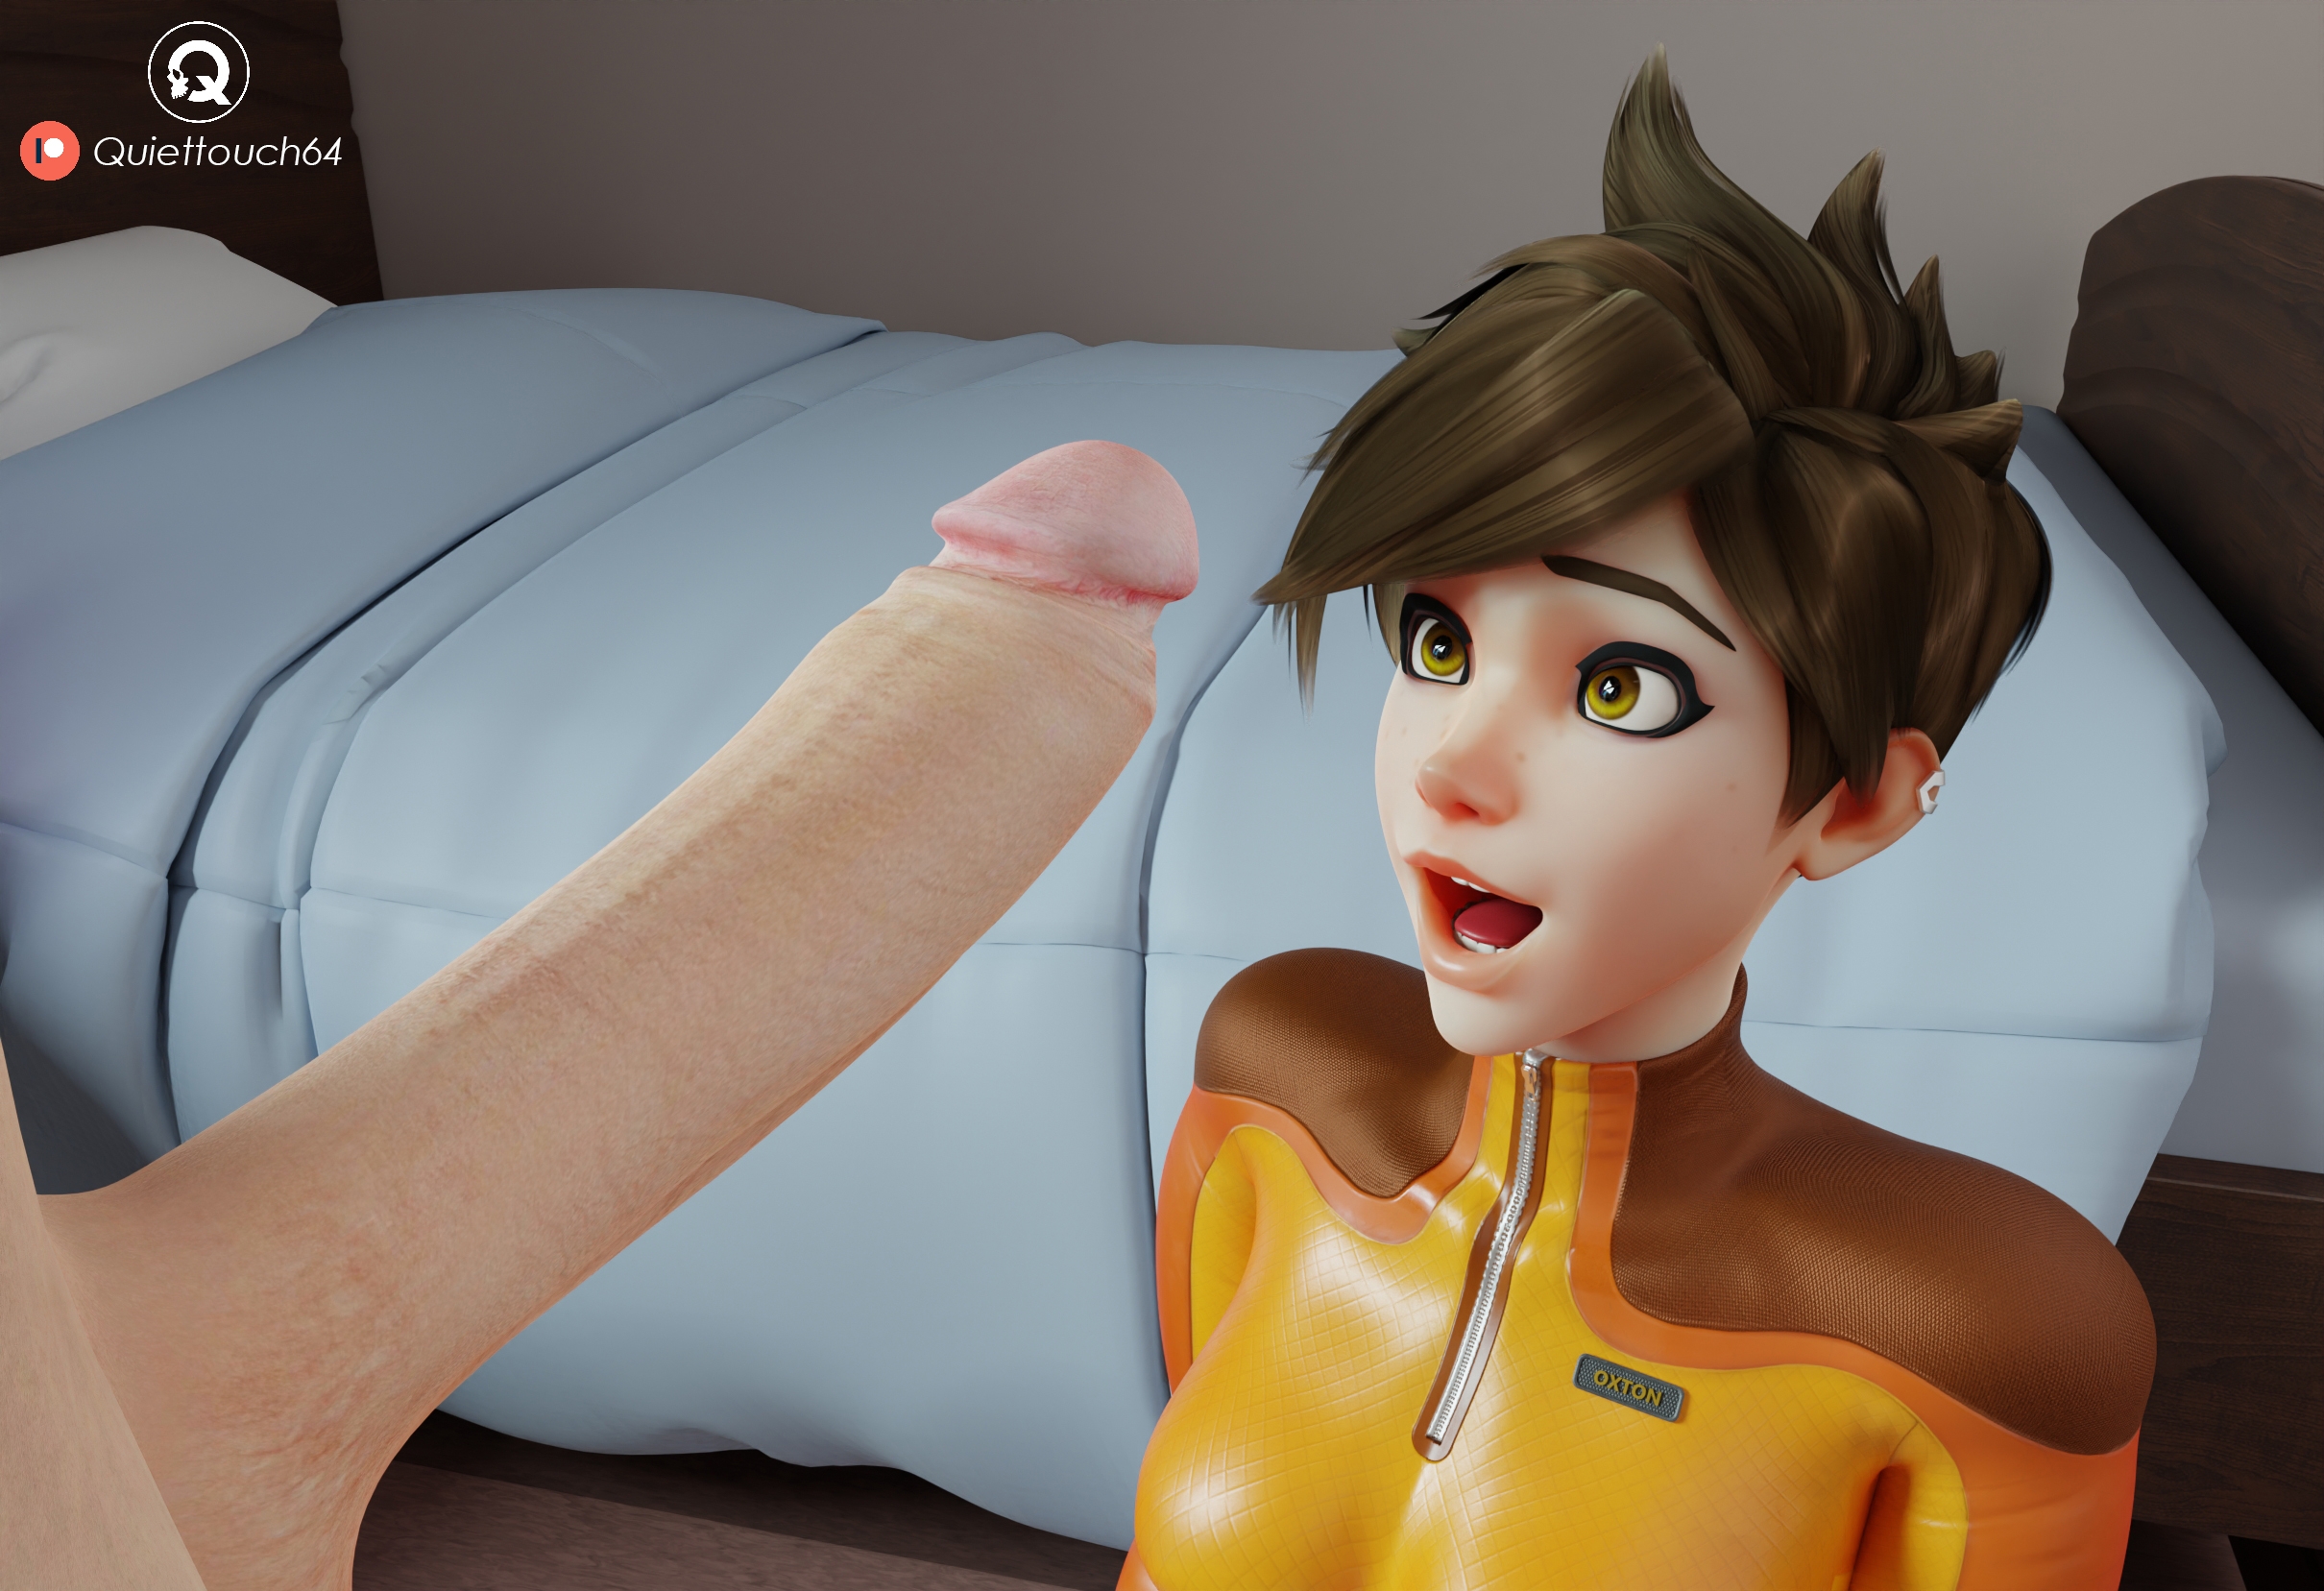 Tracer Cock Shock Overwatch Tracer Blowjob Huge Cock Big Cock White Cock Sucking Cock Licking Cock Cock In Hand Massive Cock Cock Awe Cock Shock Happy Face Cumshot Cum Cum In Mouth Cum Drip